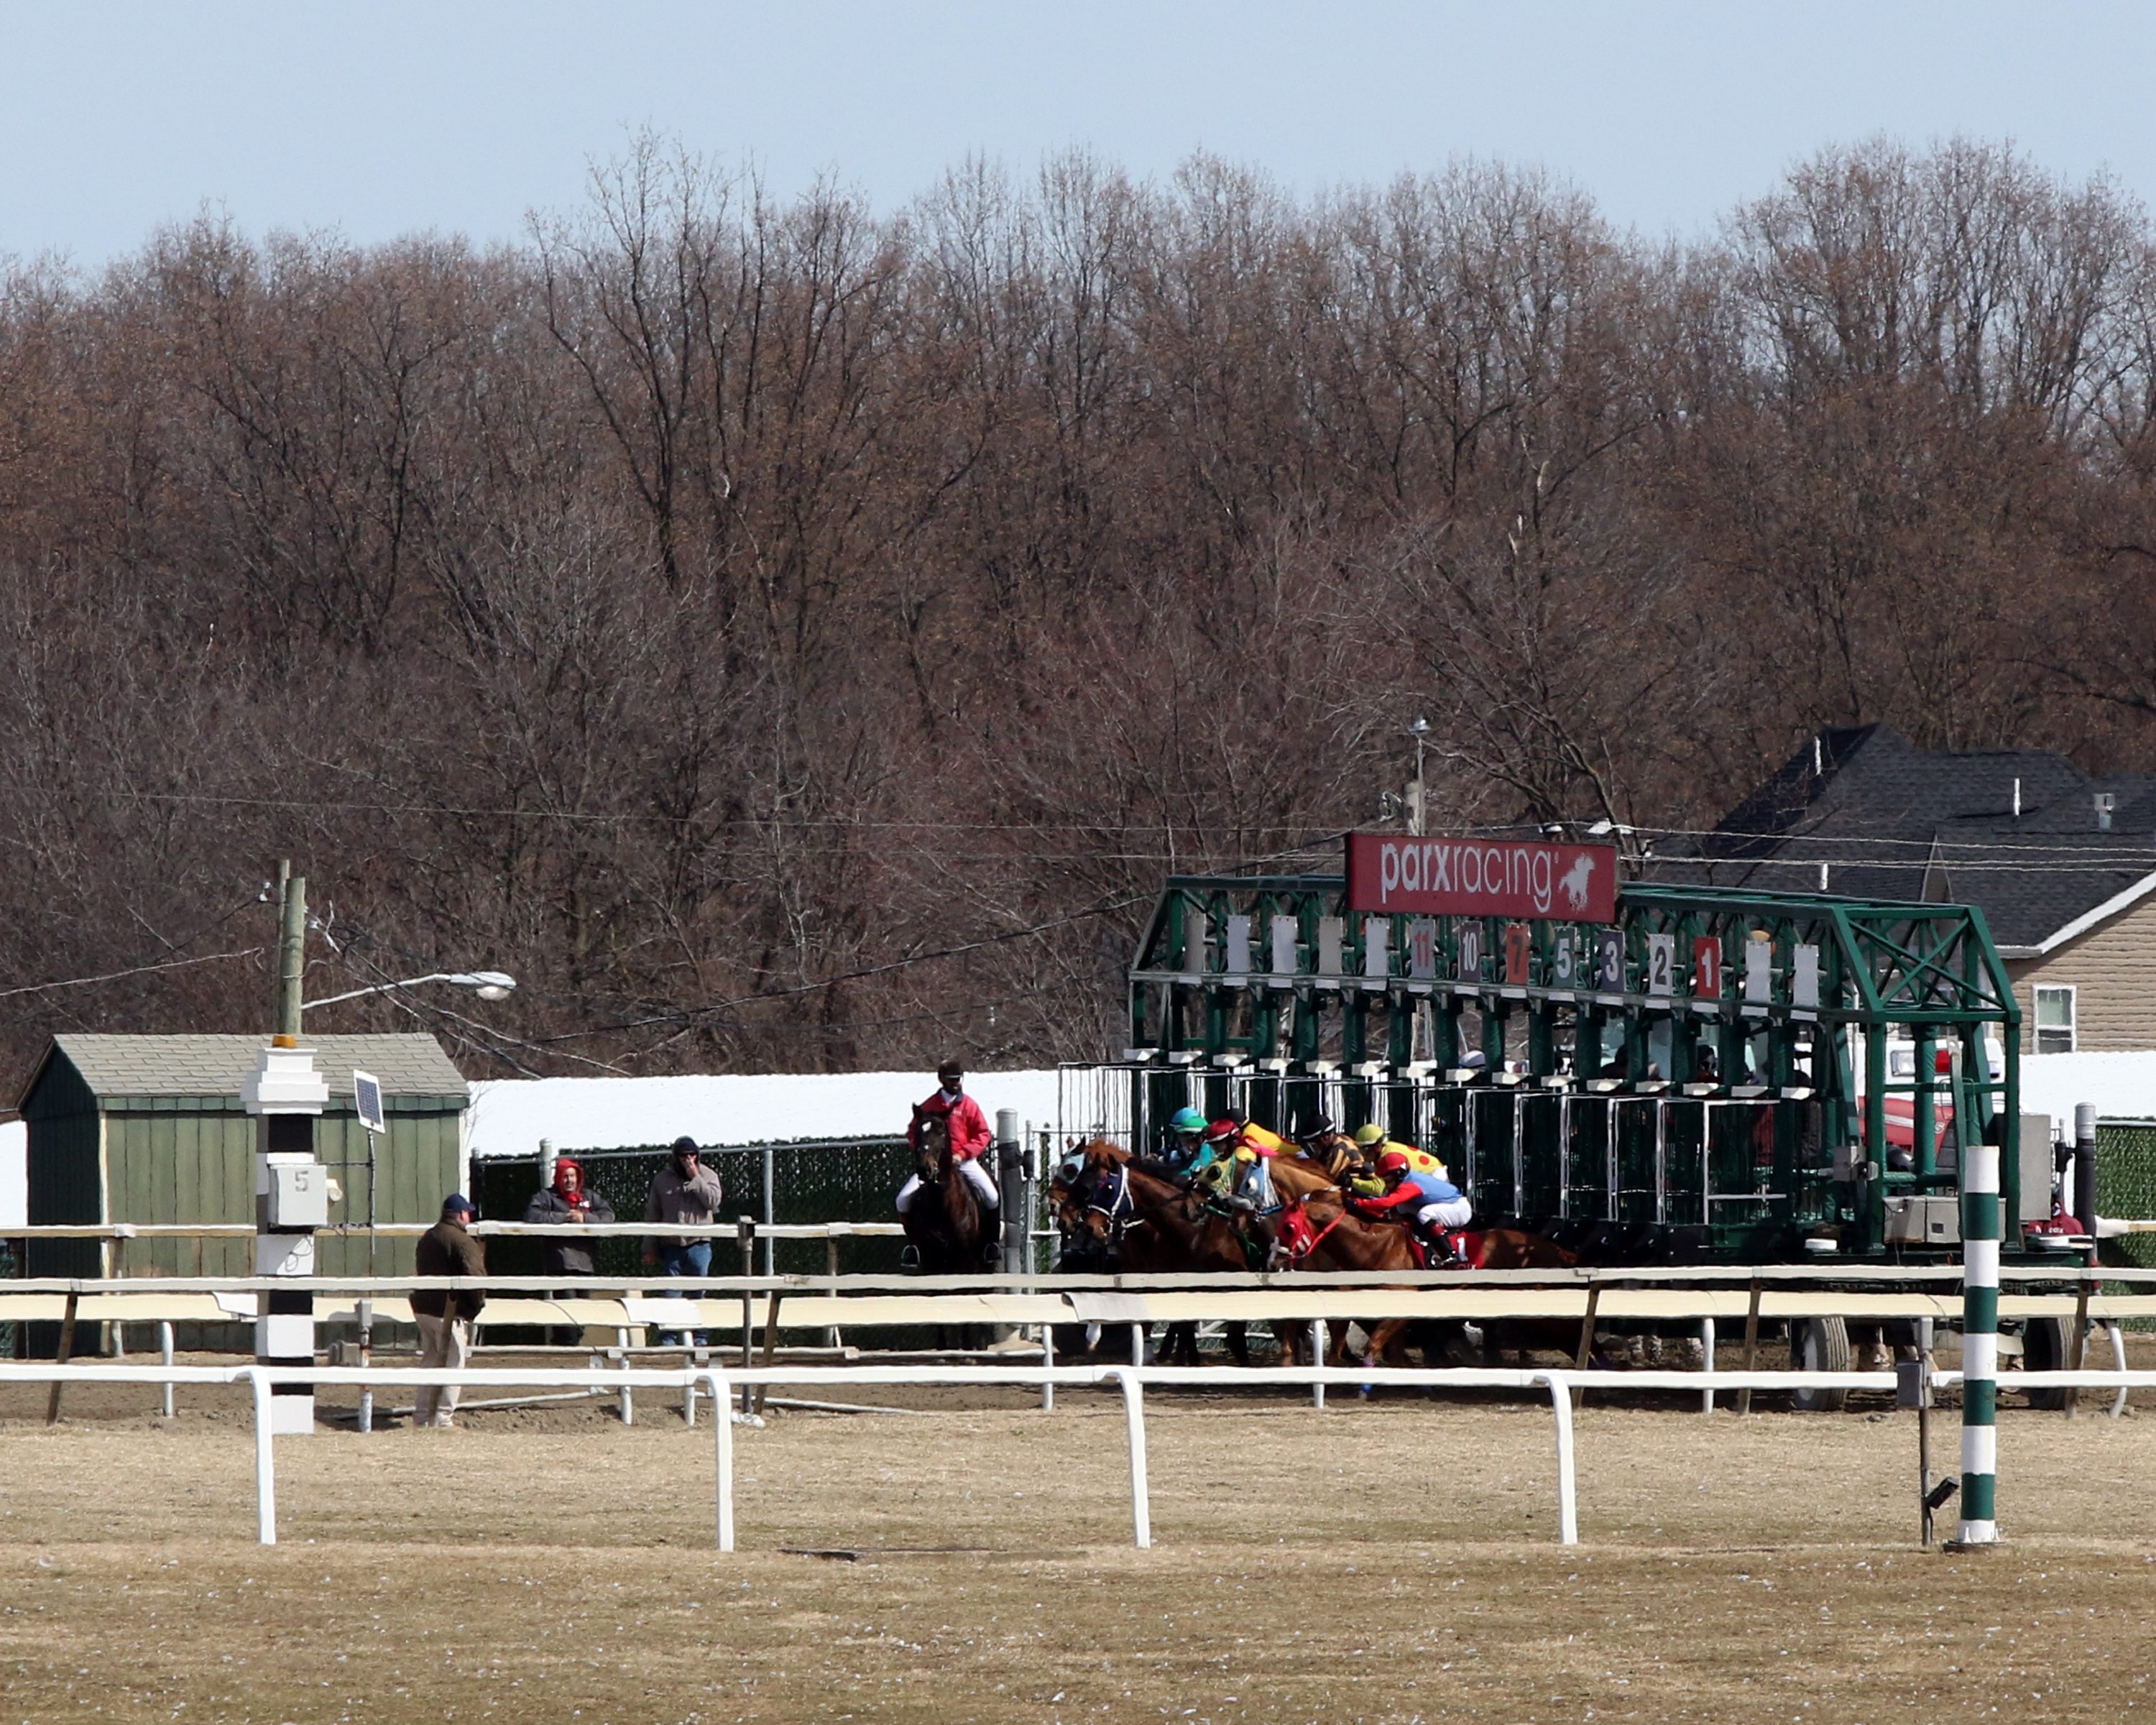 The start of Race 2 at Parx on March 8, 2022. Photo By: Chad B. Harmon